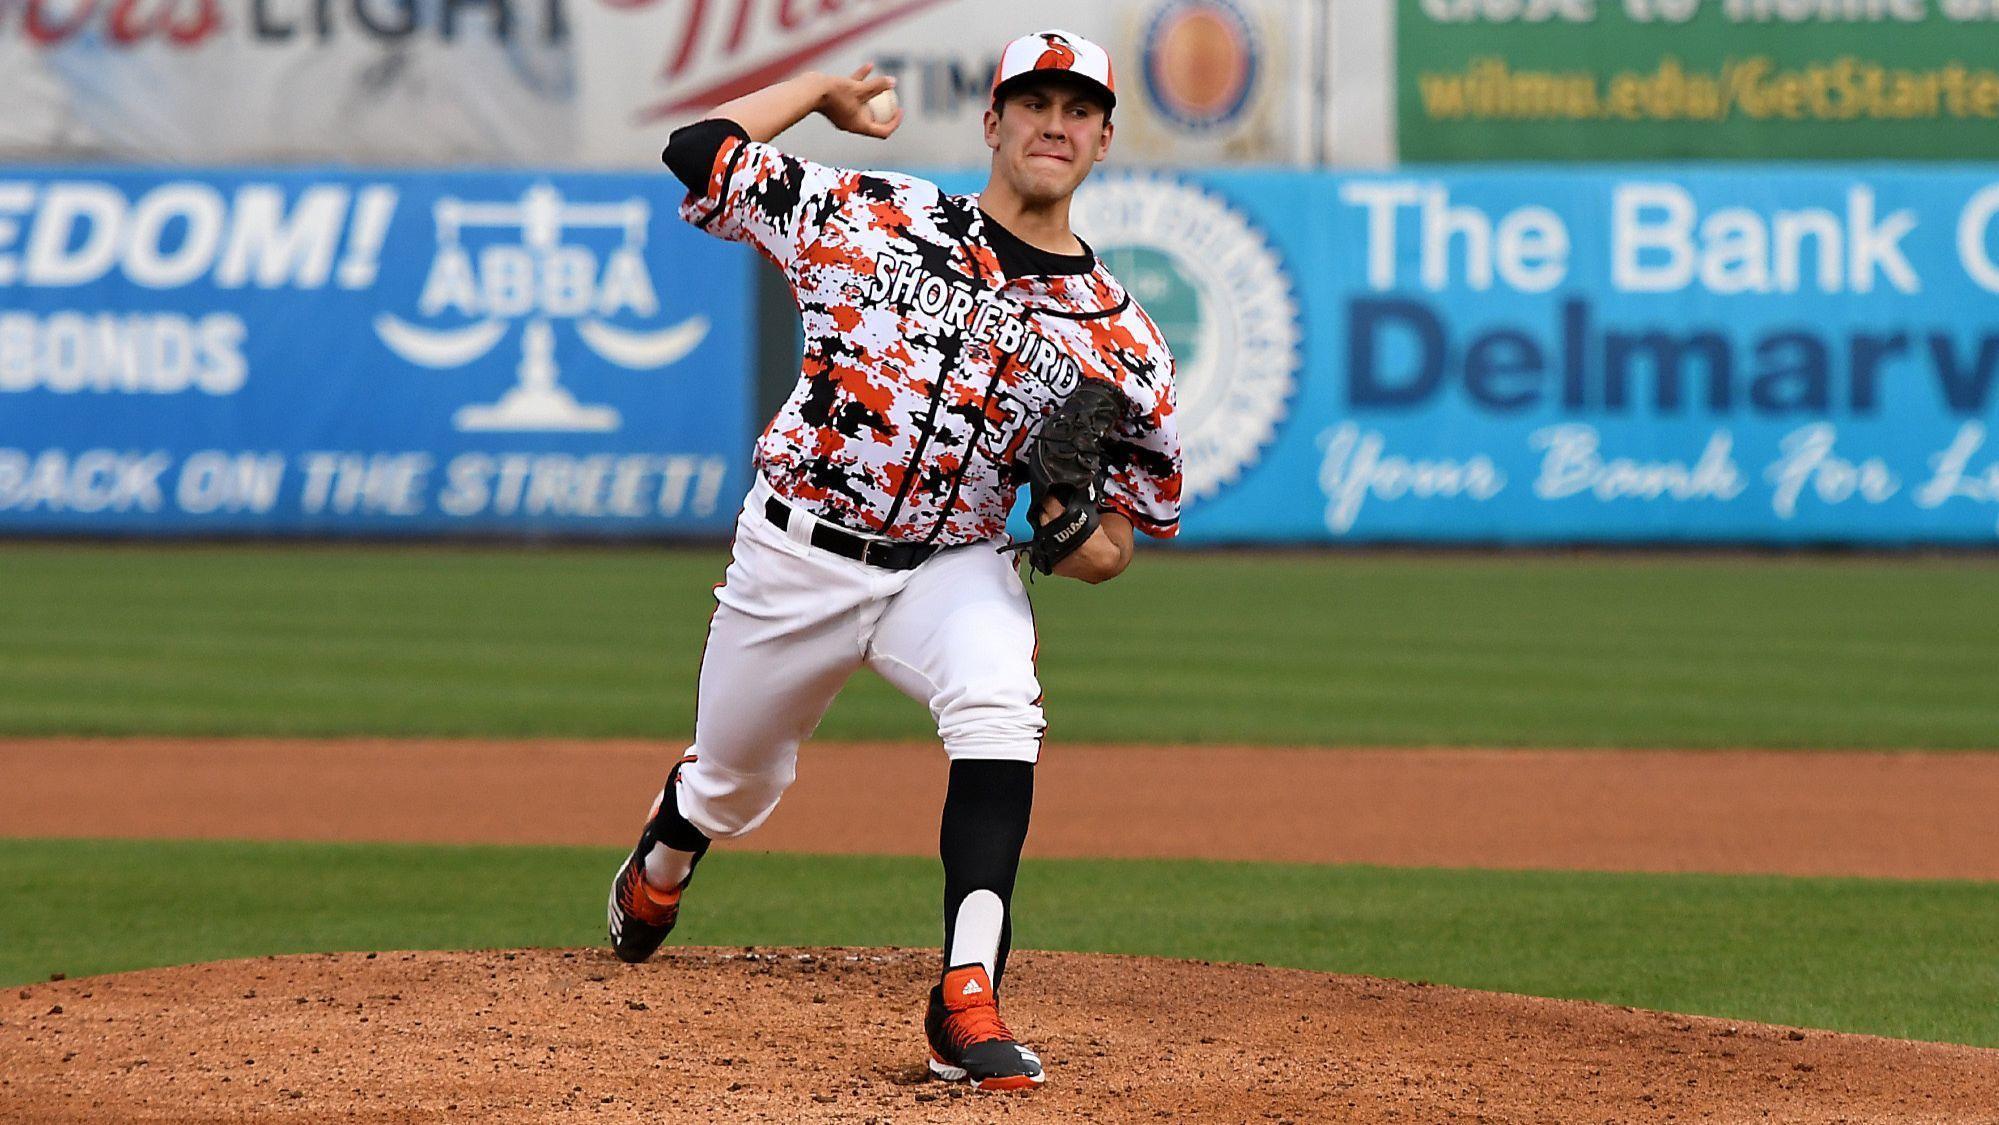 Orioles top draft pick Grayson Rodriguez dominating, exceeding